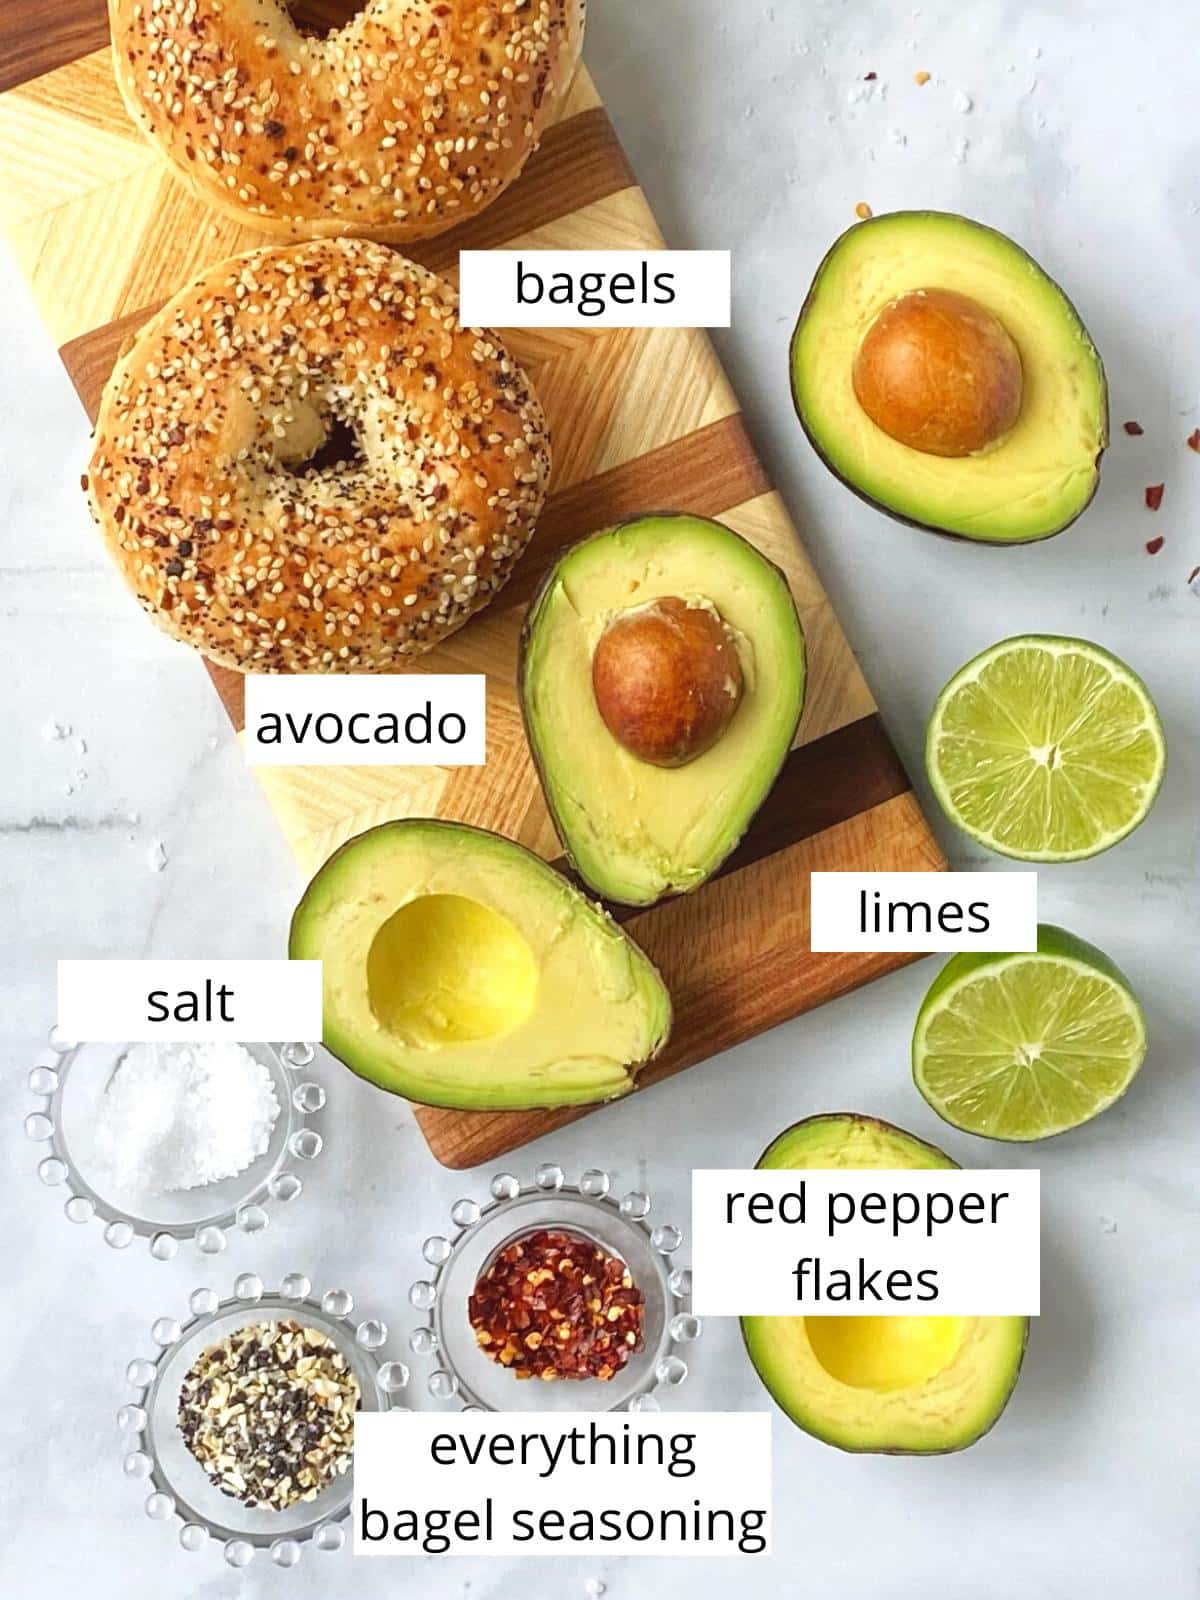 ingredients for avocado everything bagels.